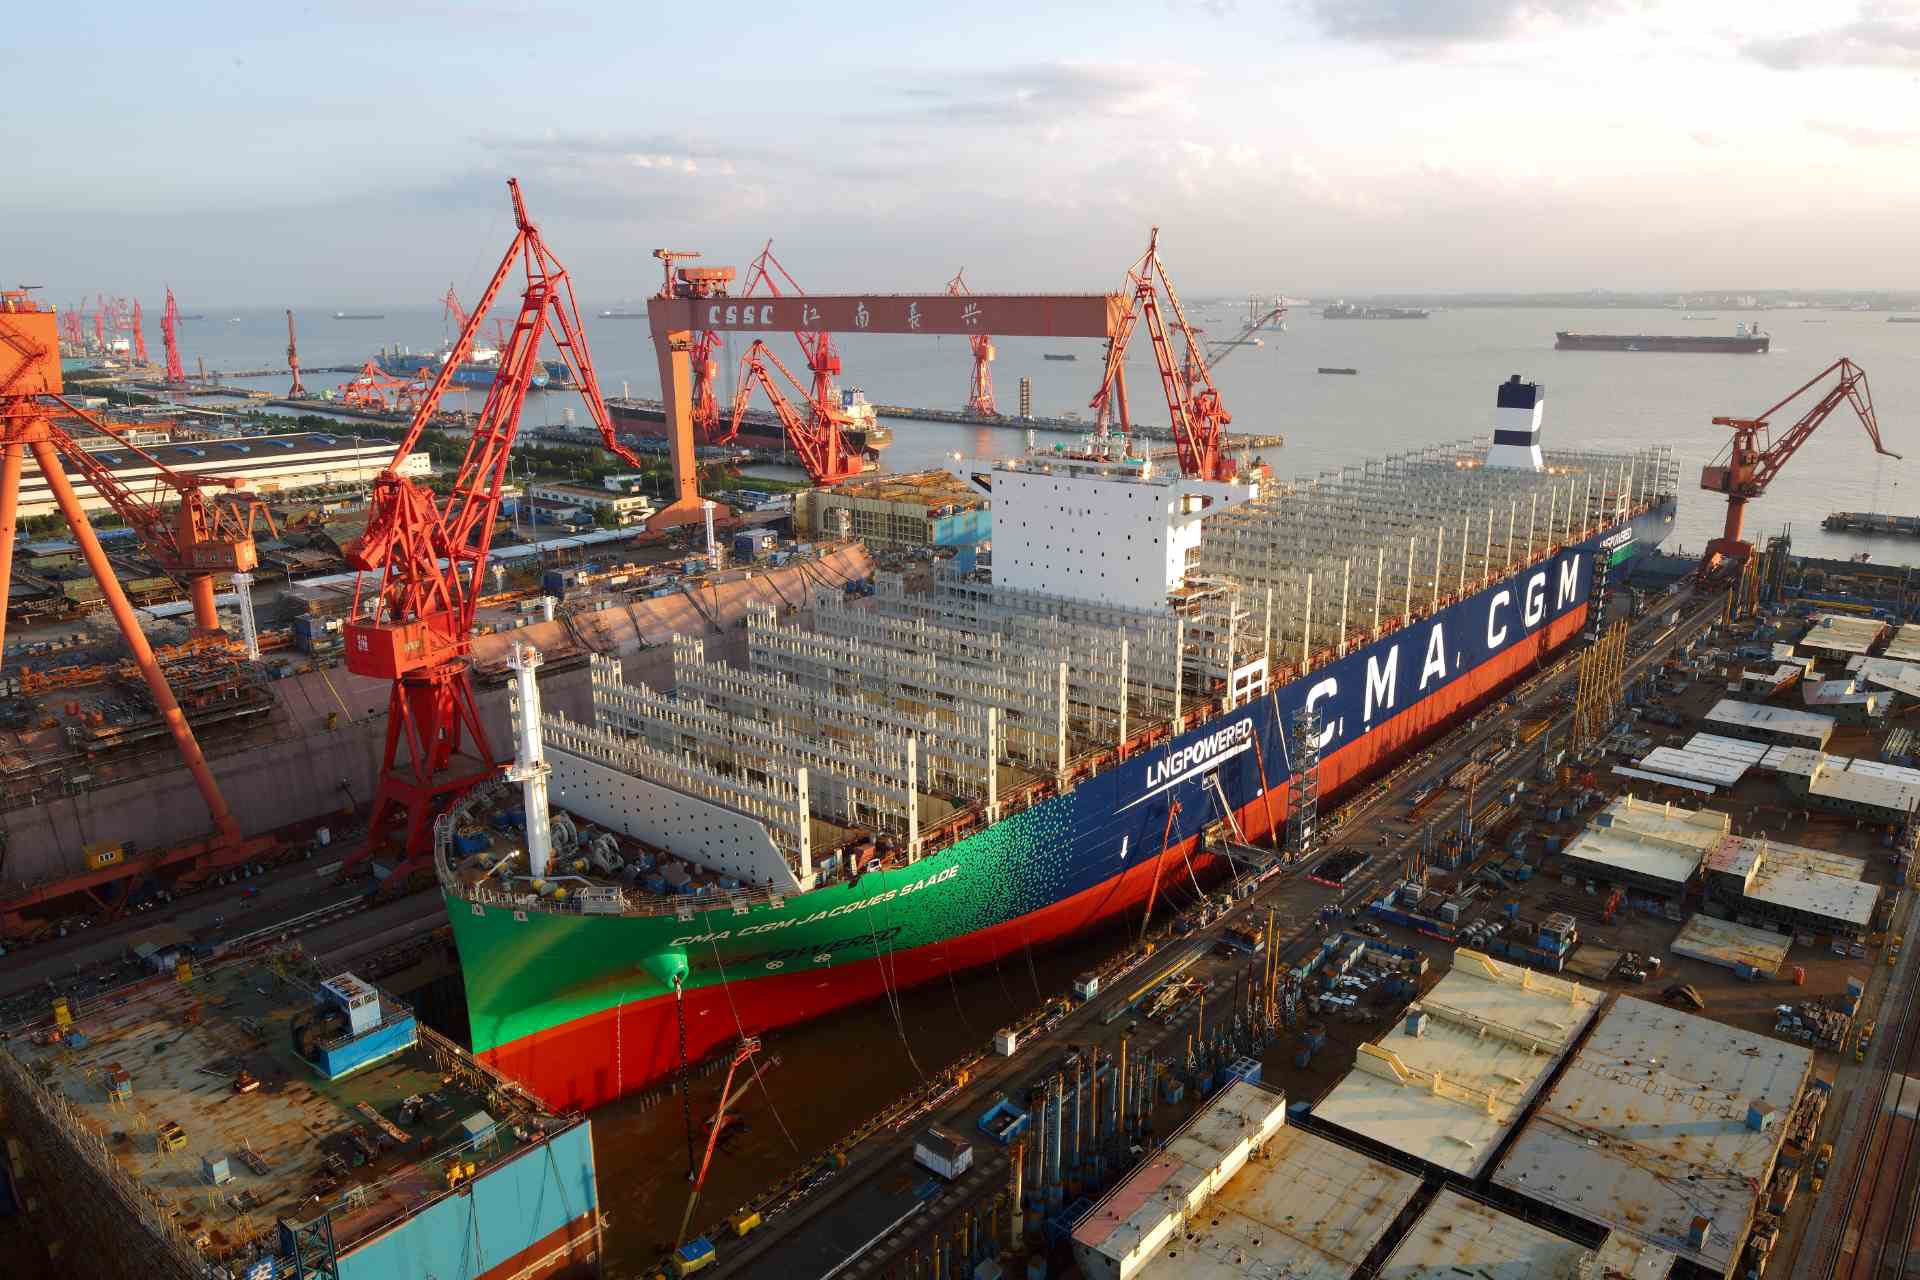 CMA CGM Orders 16 Large Containerships at  China State Shipbuilding -Reports